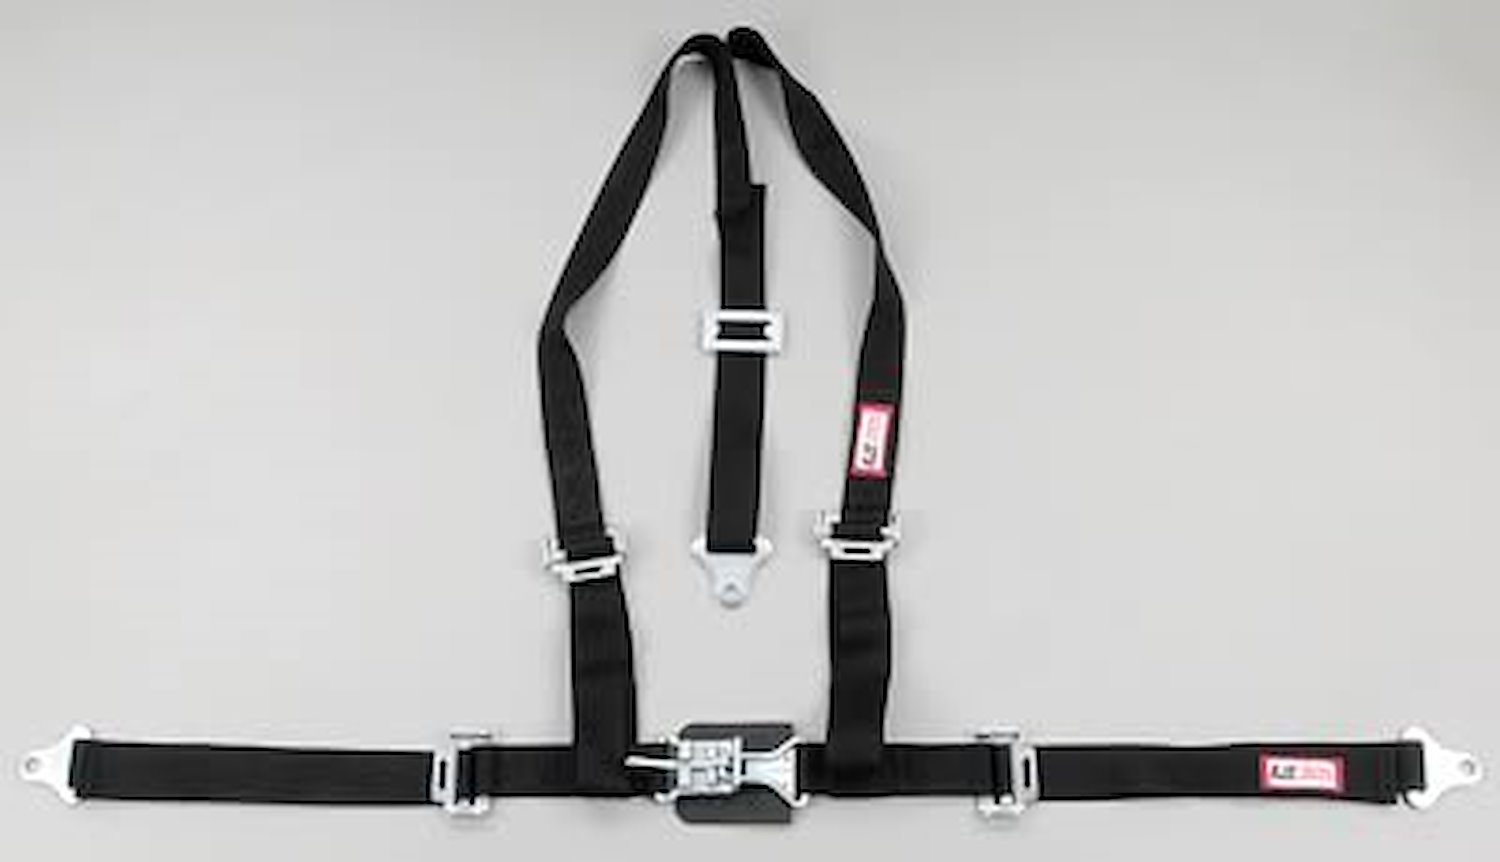 NON-SFI L&L HARNESS 2 PULL DOWN Lap Belt SEWN IN 2 S.H. Y FLOOR Mount w/STERNUM STRAP ALL WRAP ENDS BLUE